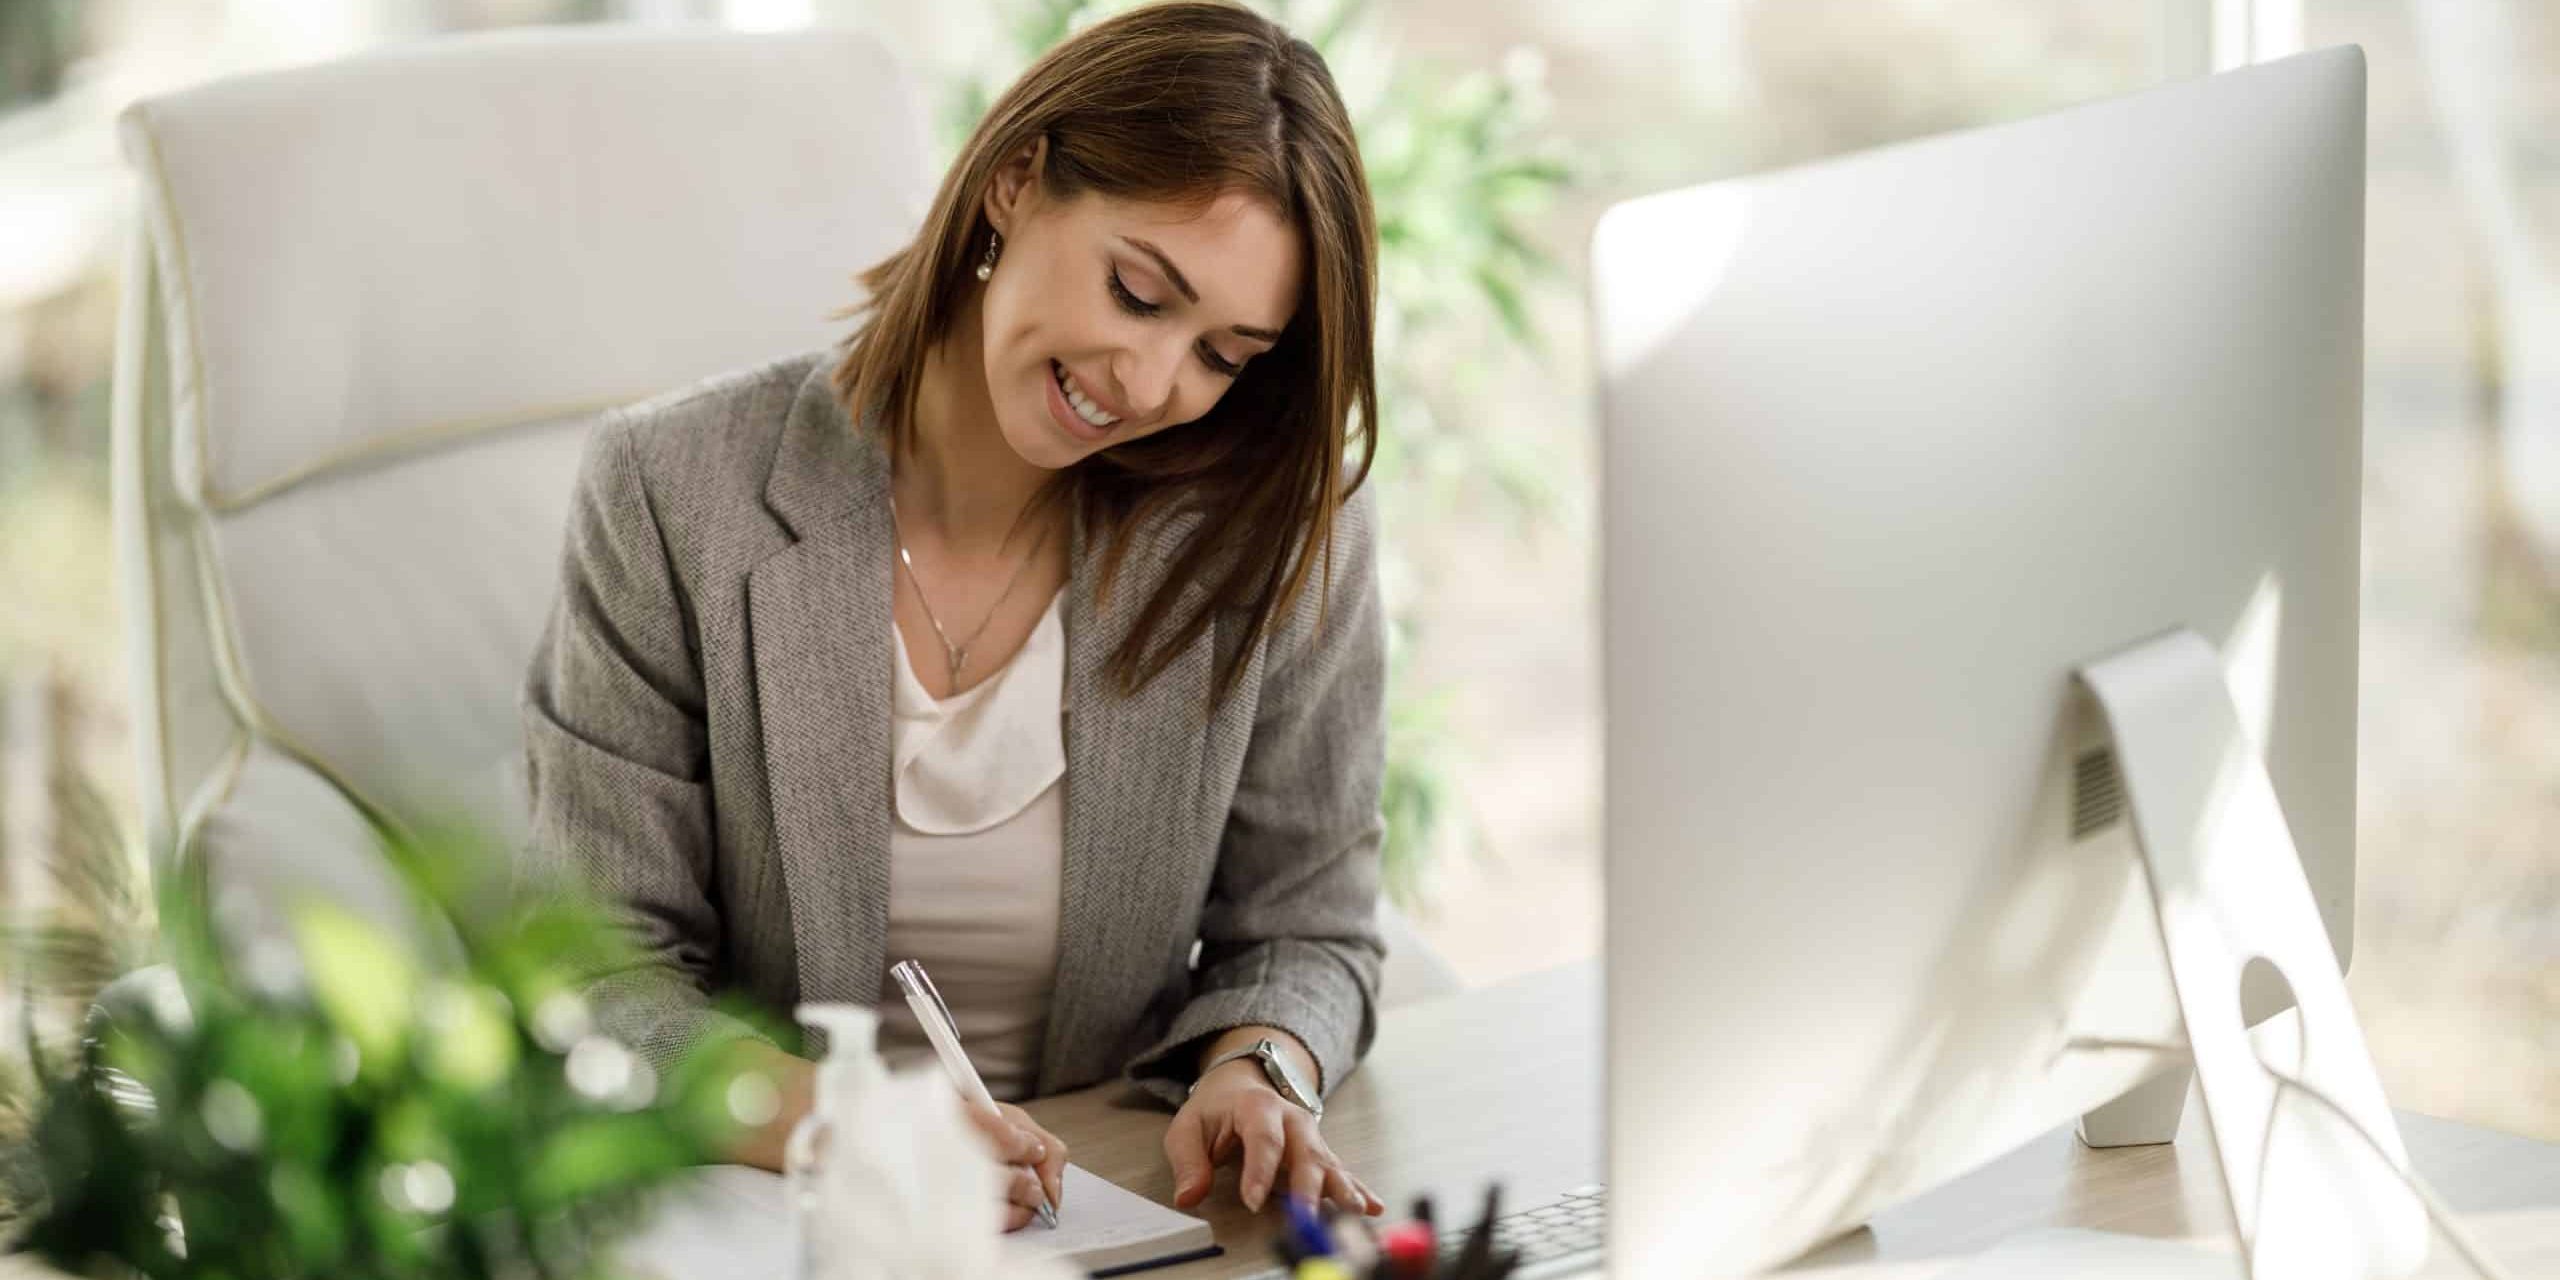 A smiling business woman write something down in a notebook while using a computer in her home office.